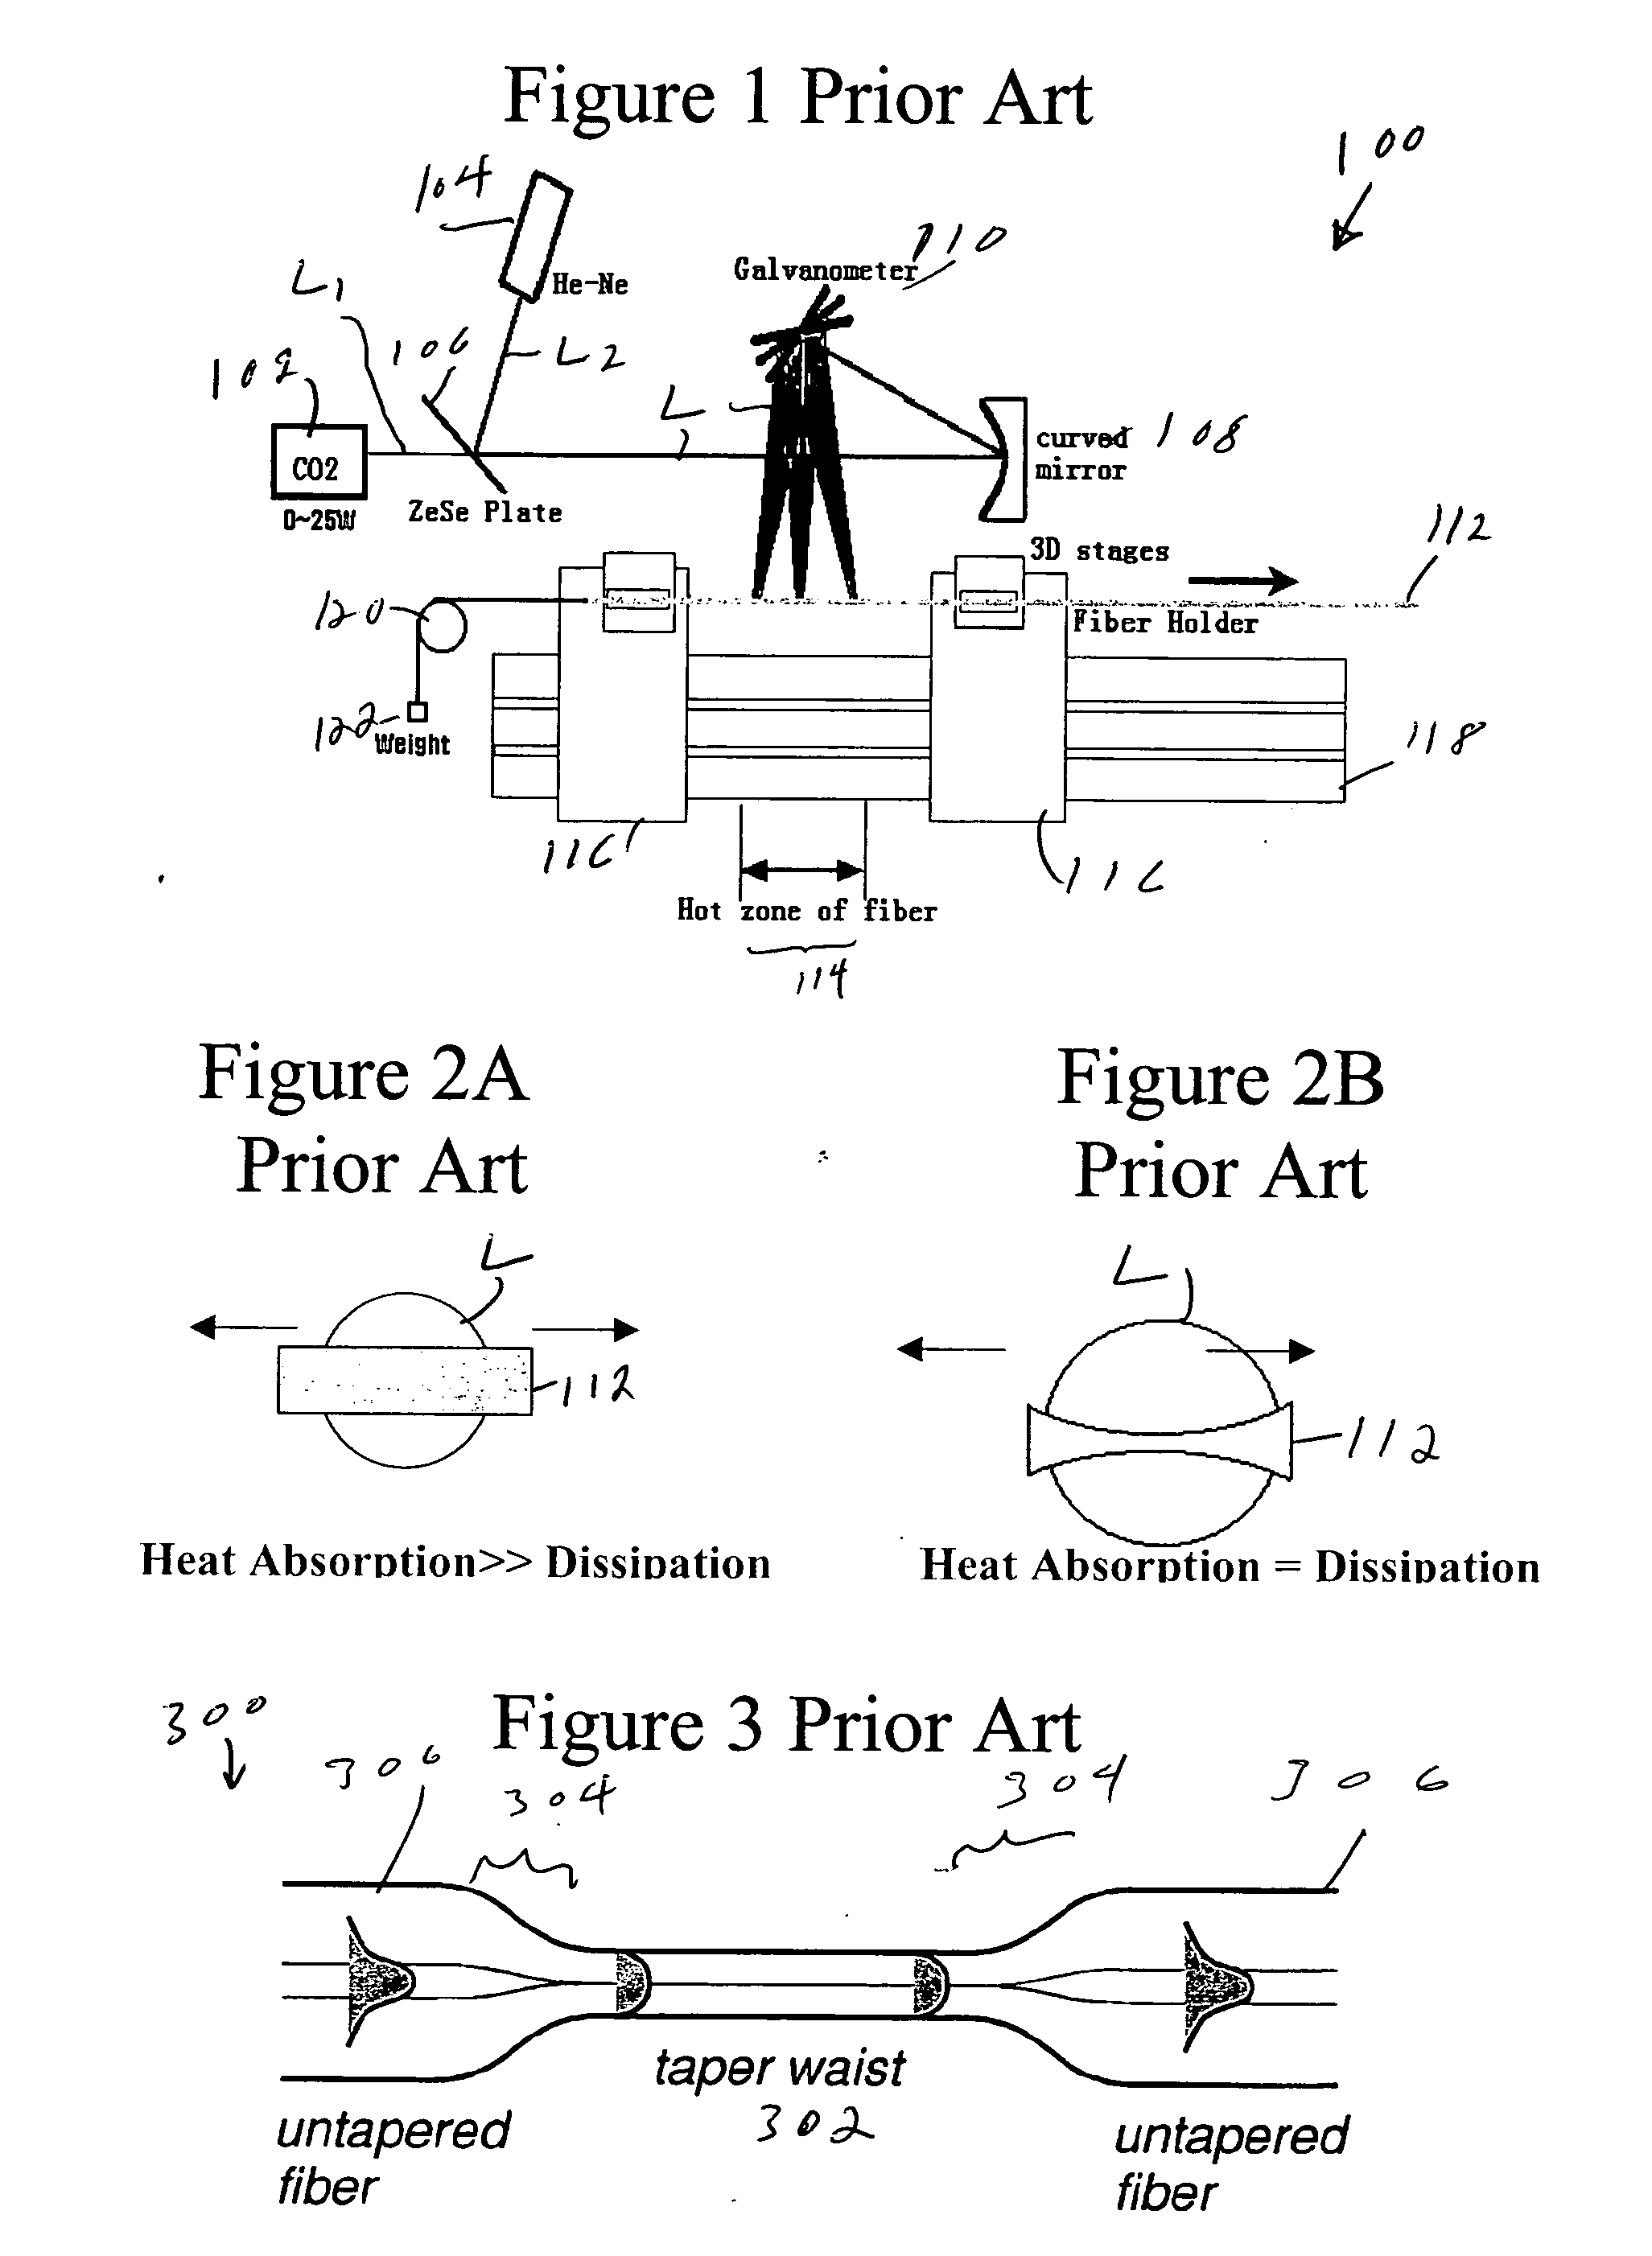 Fiber device with high nonlinearity, dispersion control and gain